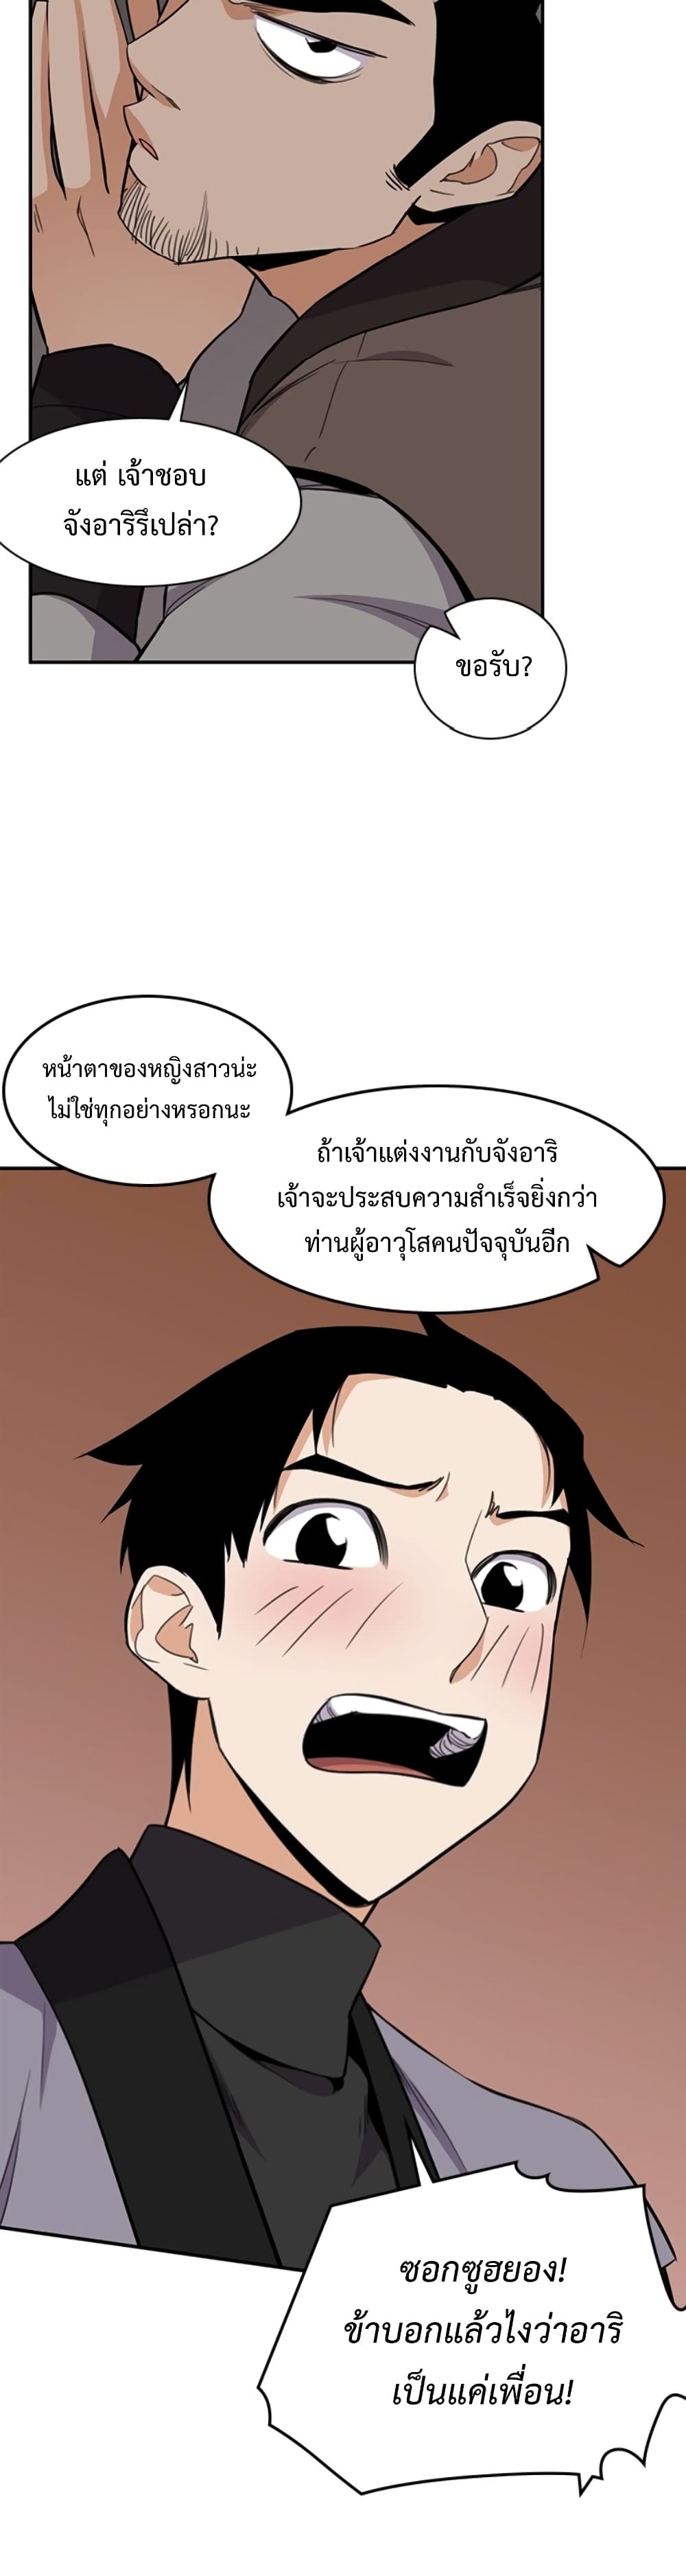 The Strongest Ever à¸à¸­à¸à¸à¸µà¹ 33 (17)